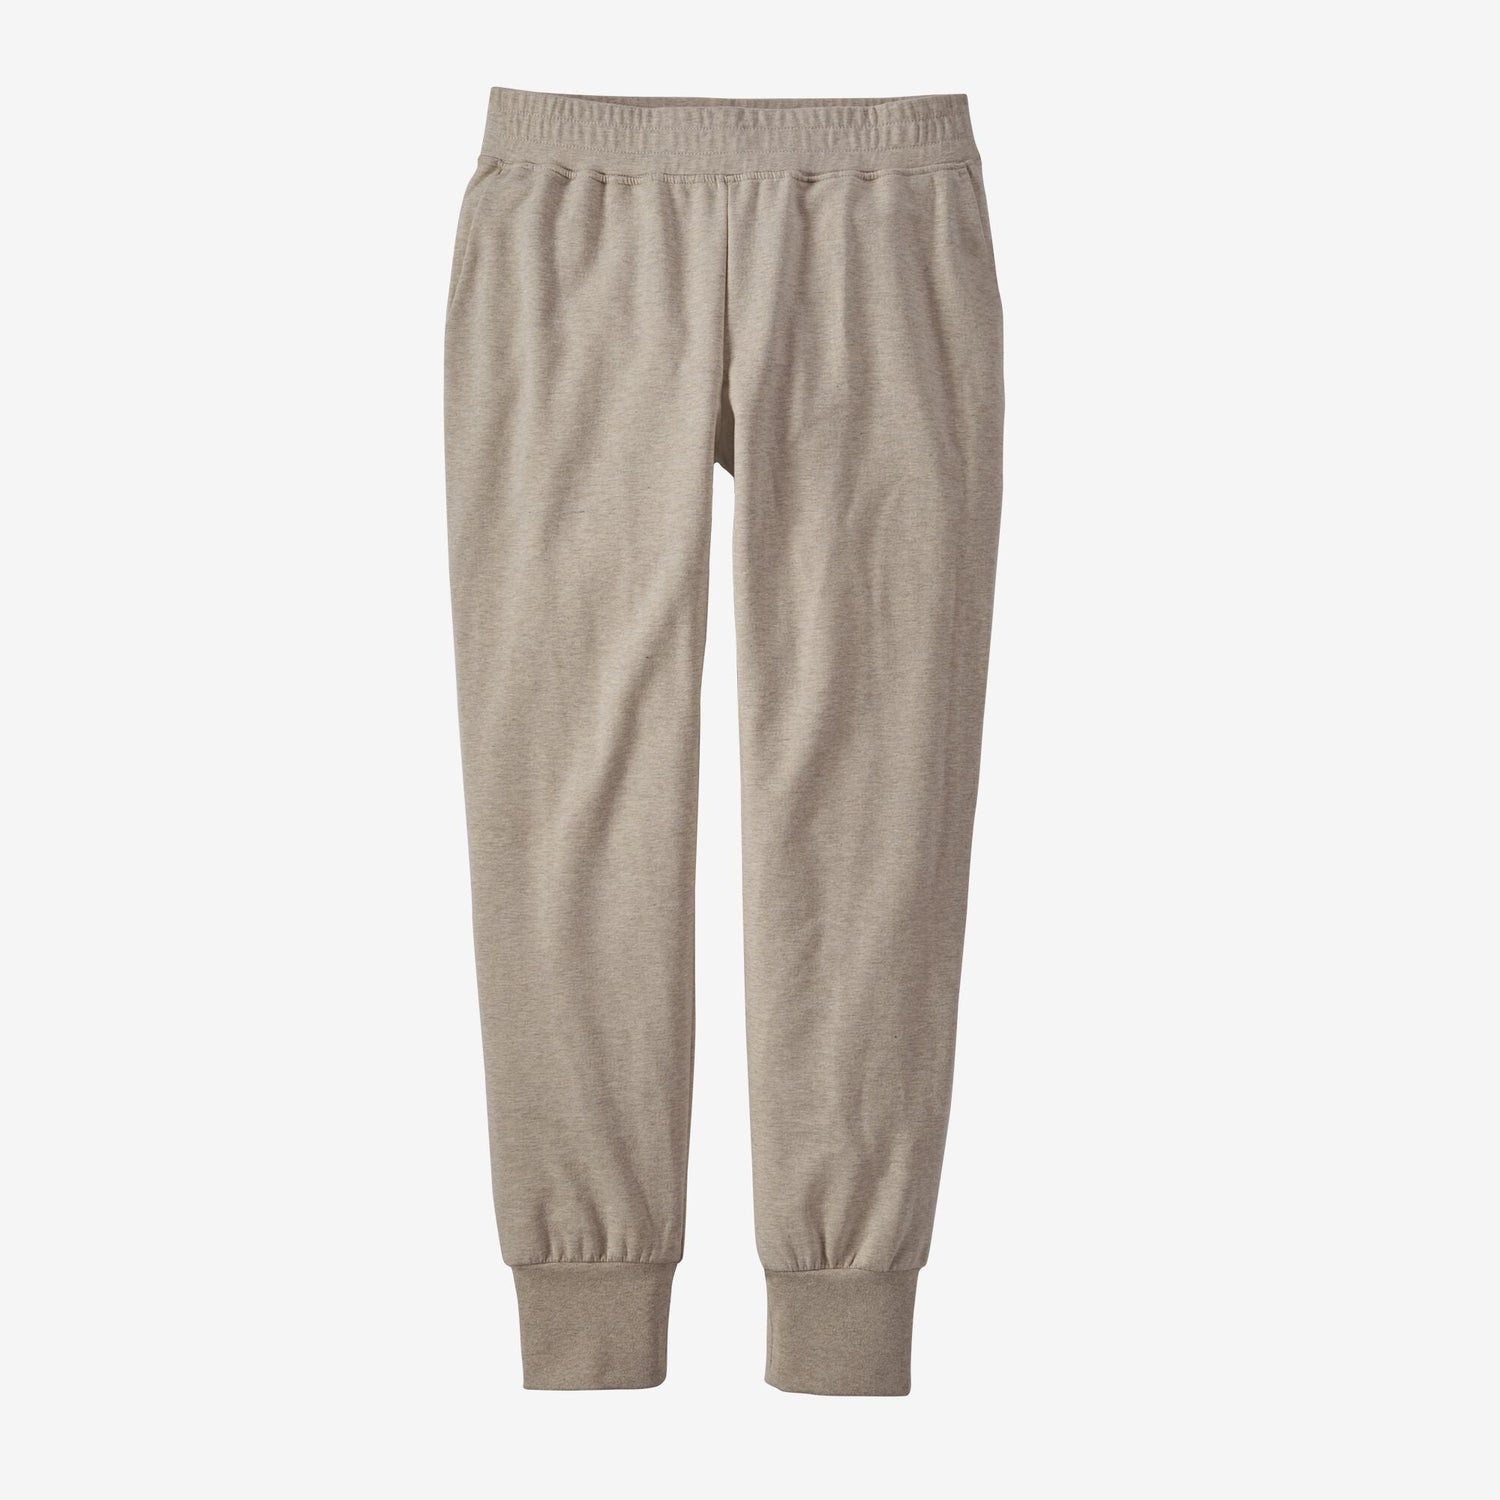 Patagonia W's Ahnya Pants - Organic Cotton & Recycled Polyester Dyno White Pants